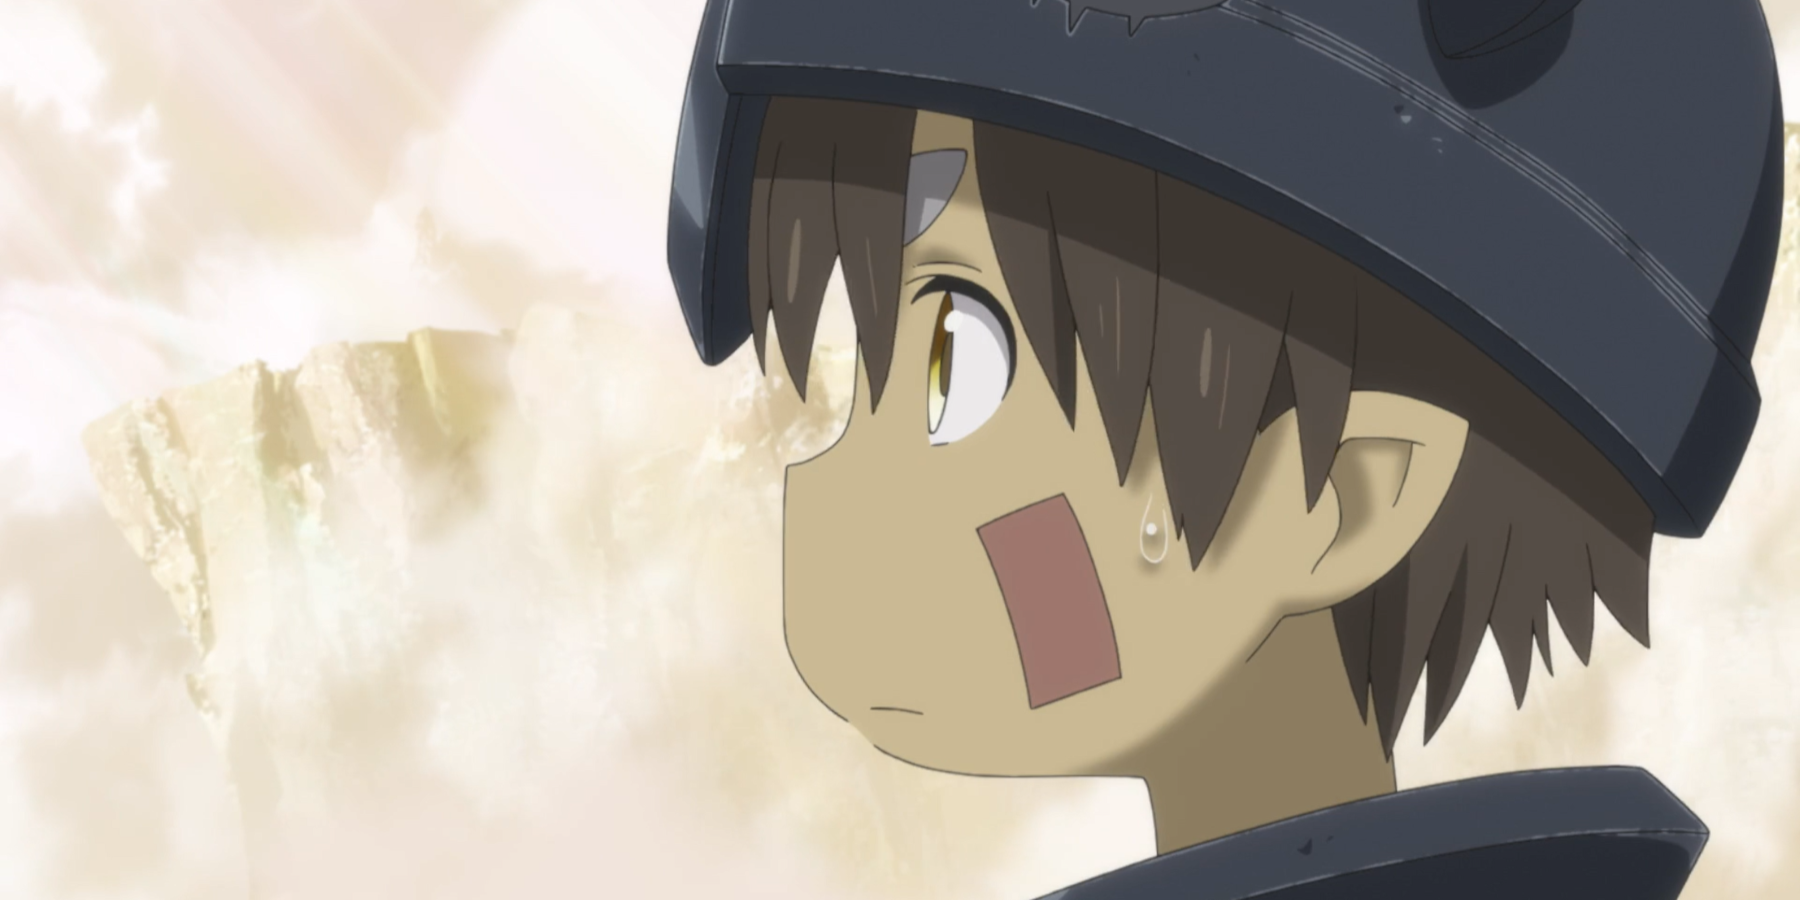 Made in Abyss: Season 2, Episode 4